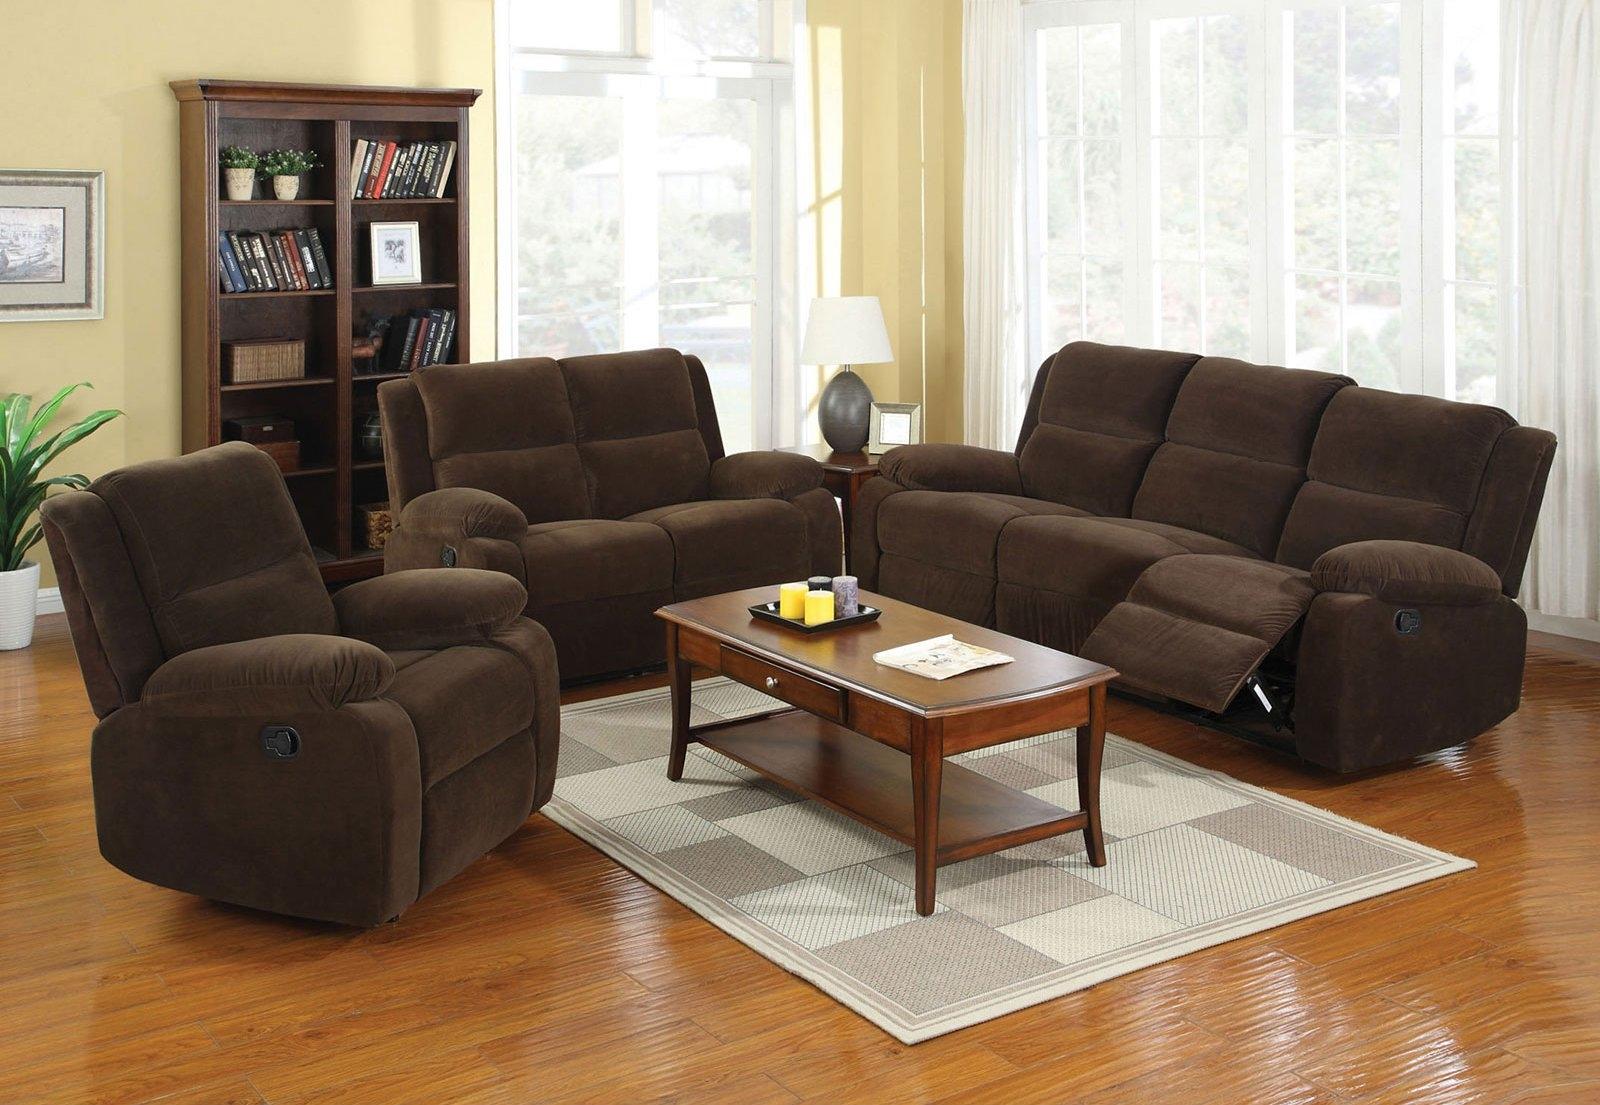 Transitional Recliner Sofa Loveseat and Chair CM6554-3PC Haven CM6554-3PC in Dark Brown 